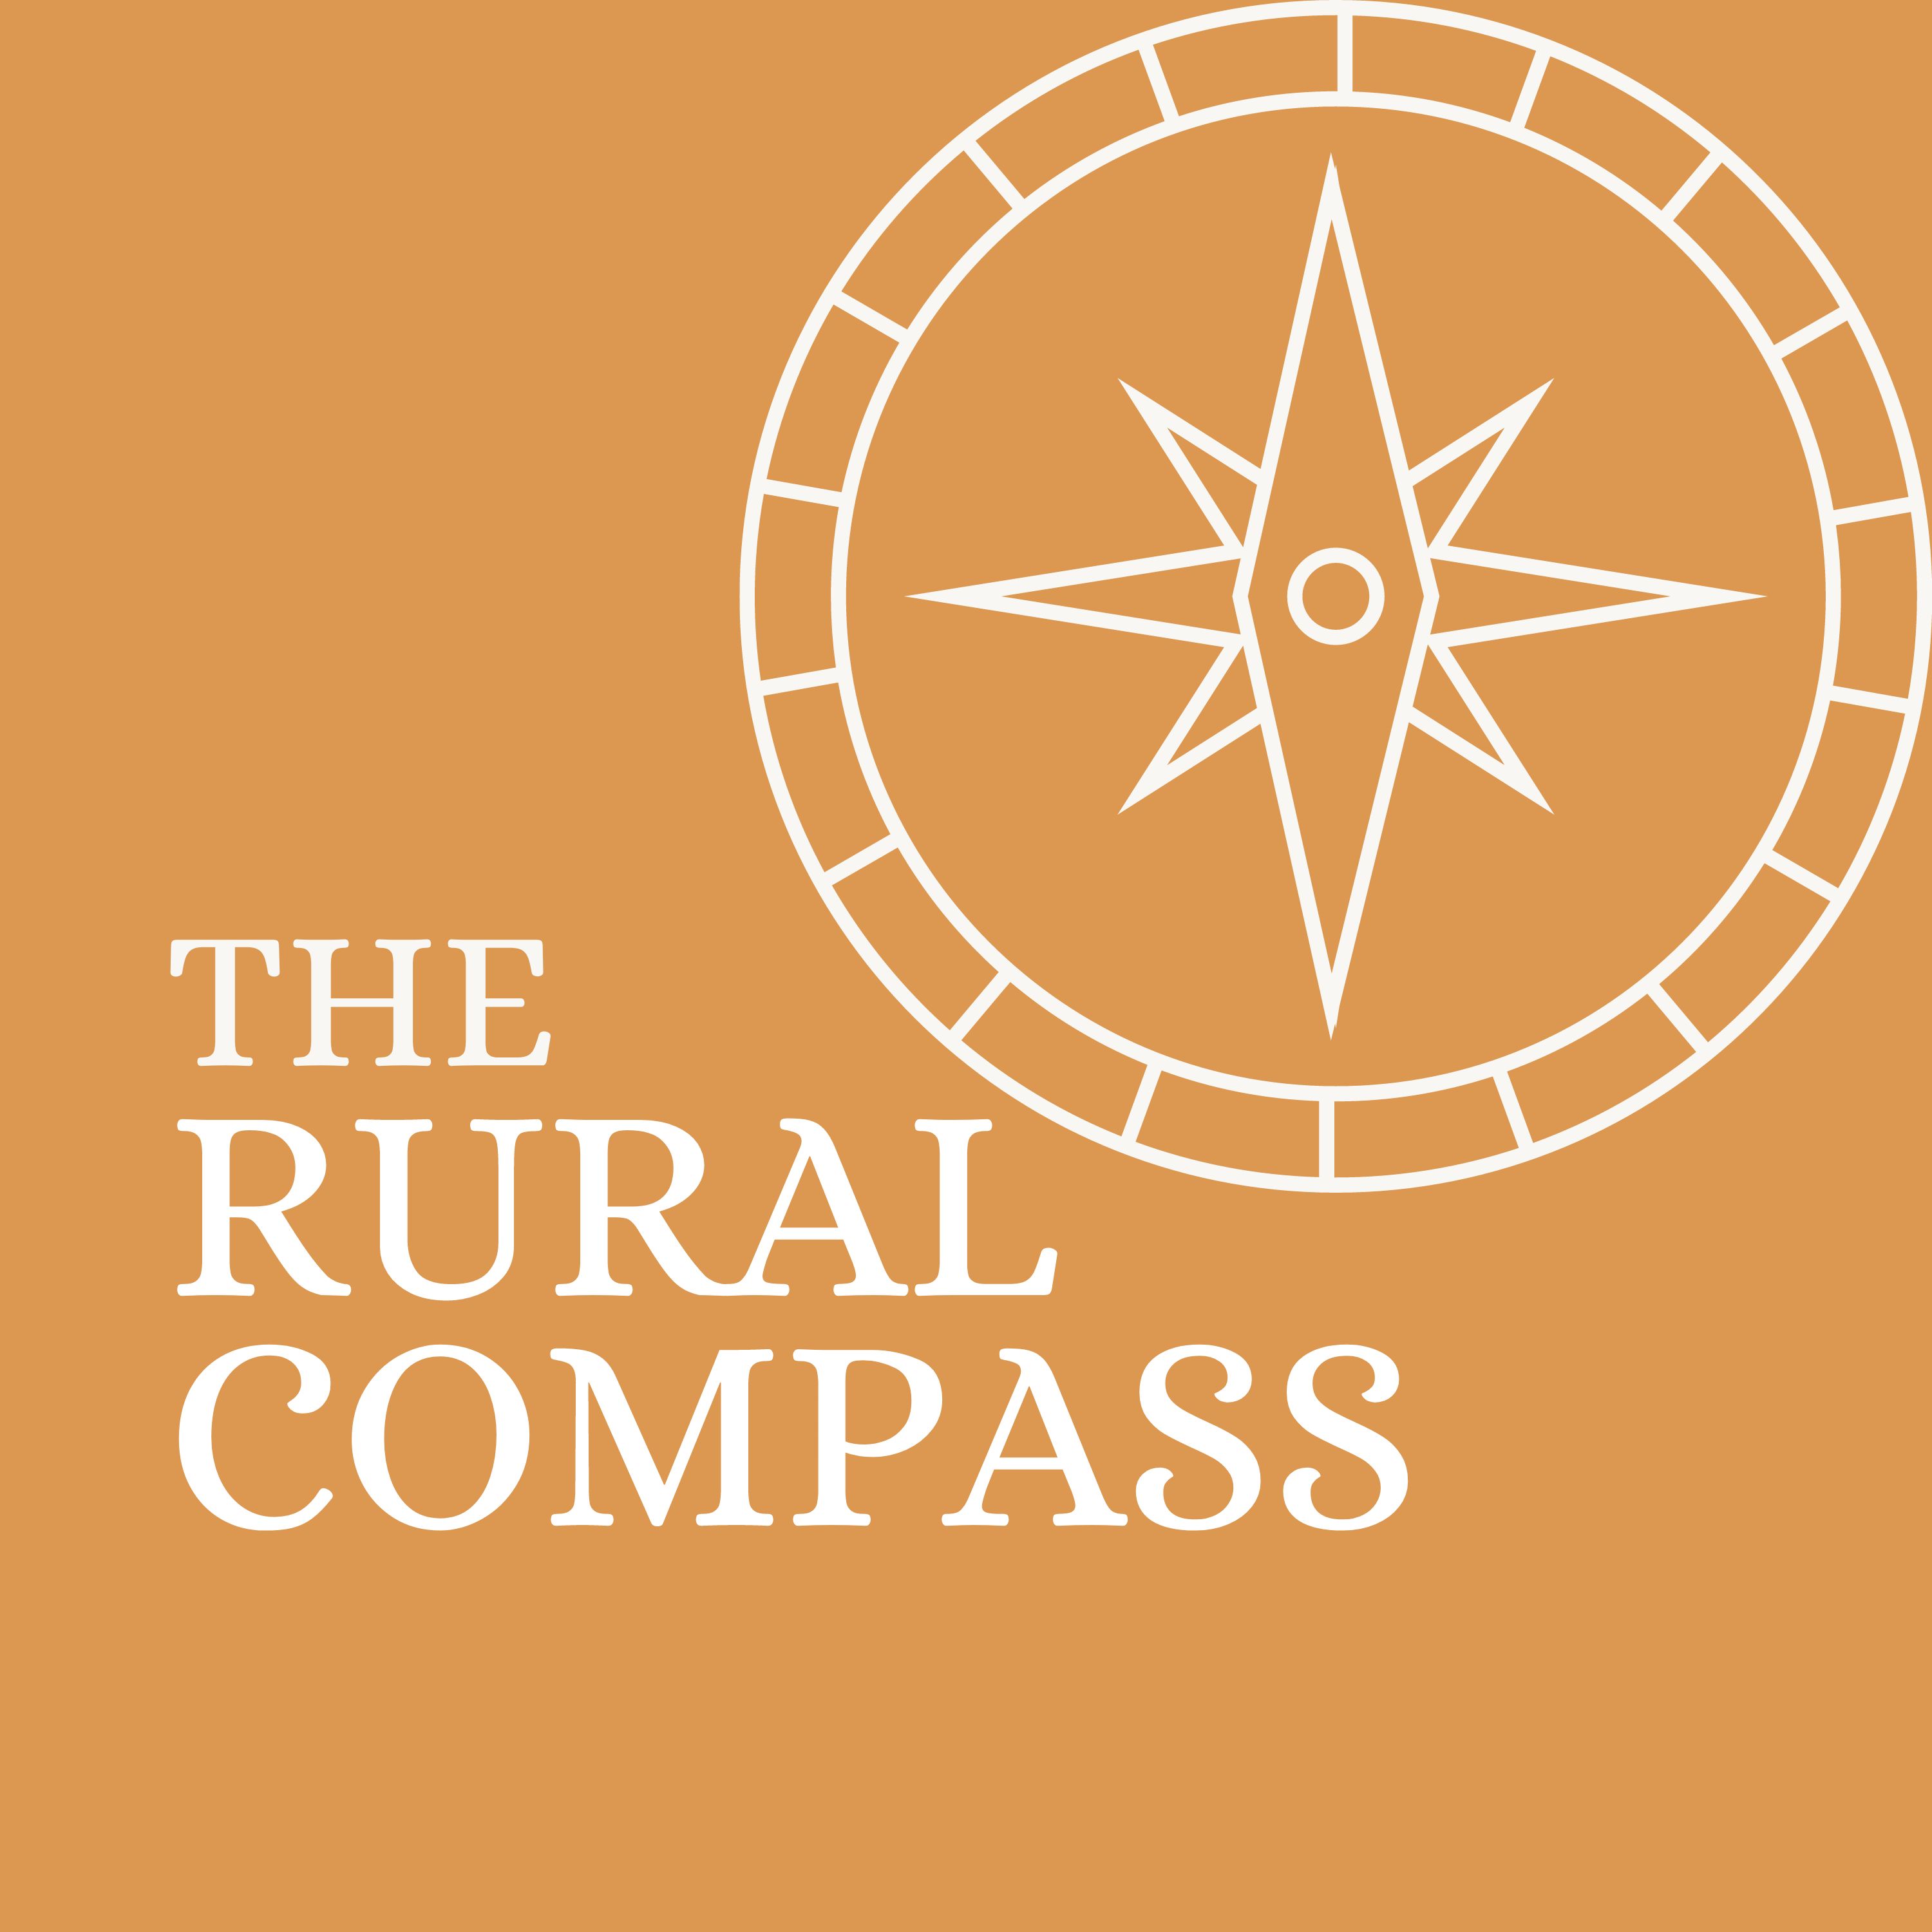 The Rural Compass